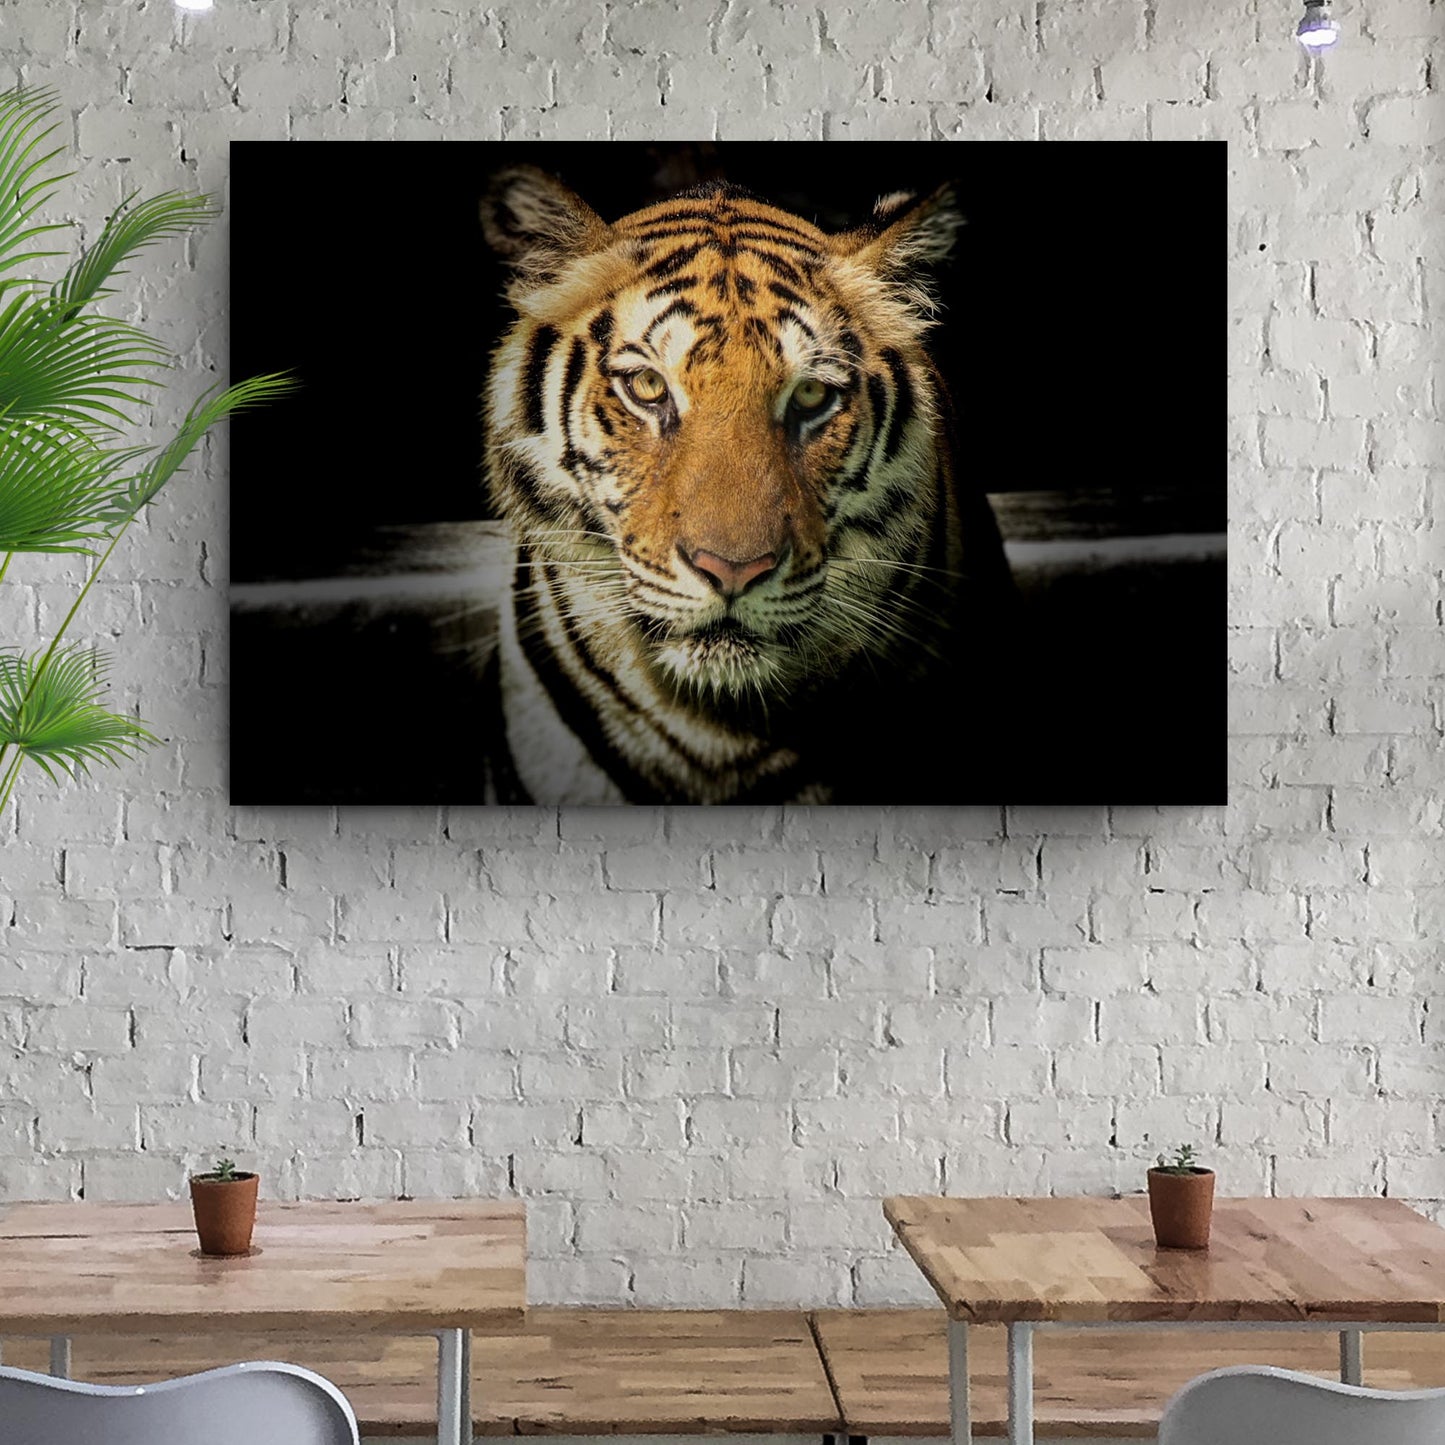 Lurking Tiger In The Dark Canvas Wall Art - Image by Tailored Canvases